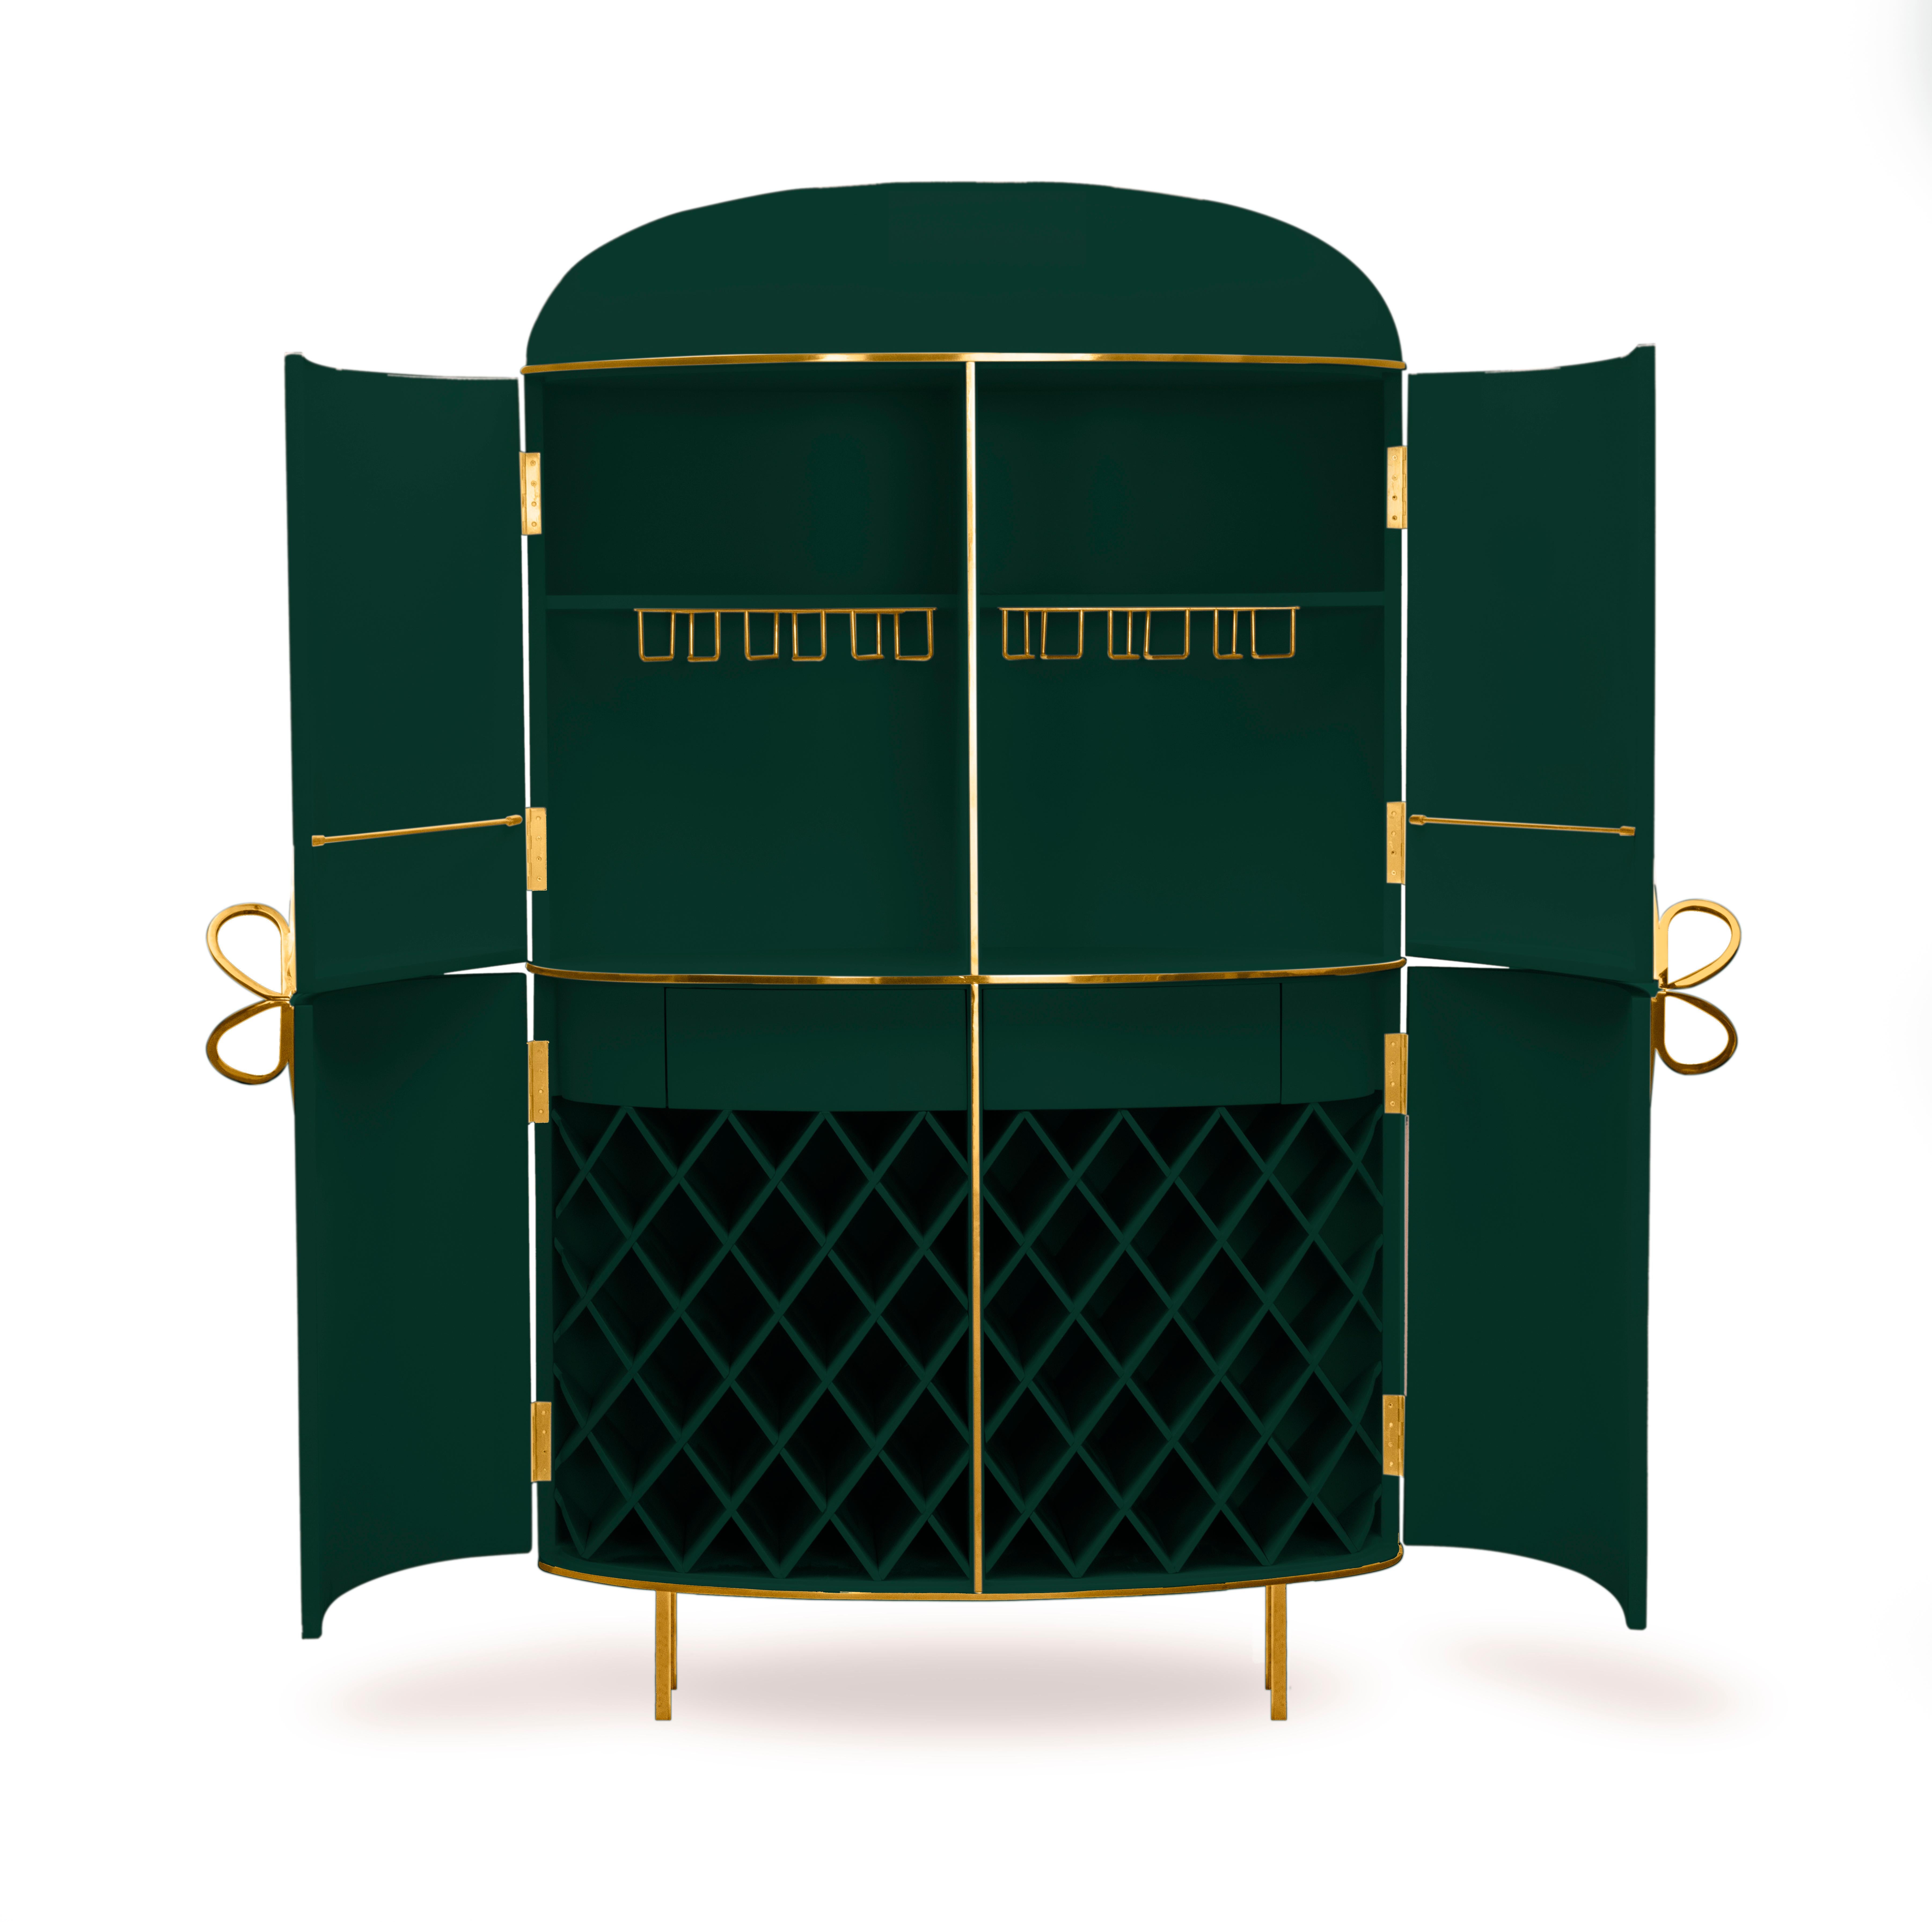 88 Secrets Green Bar Cabinet with Gold Trims by Nika Zupanc is a rich, deep green bar cabinet in sensuous, feminine lines with luxurious metal trims in gold. A statement piece in any interior space! 

Nika Zupanc, a strikingly renowned Slovenian